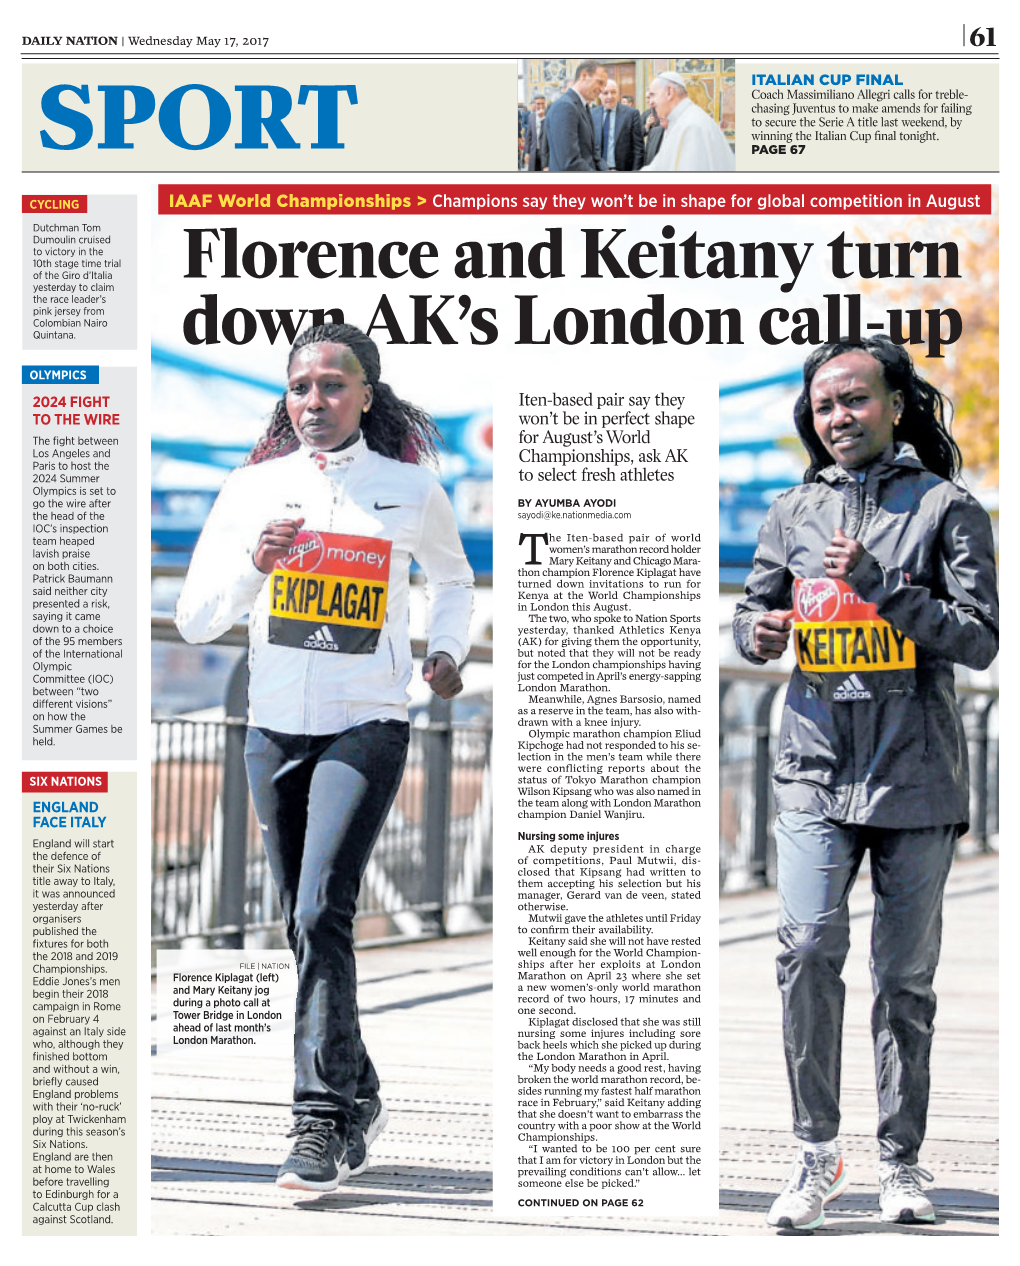 Florence and Keitany Turn Down AK's London Call-Up